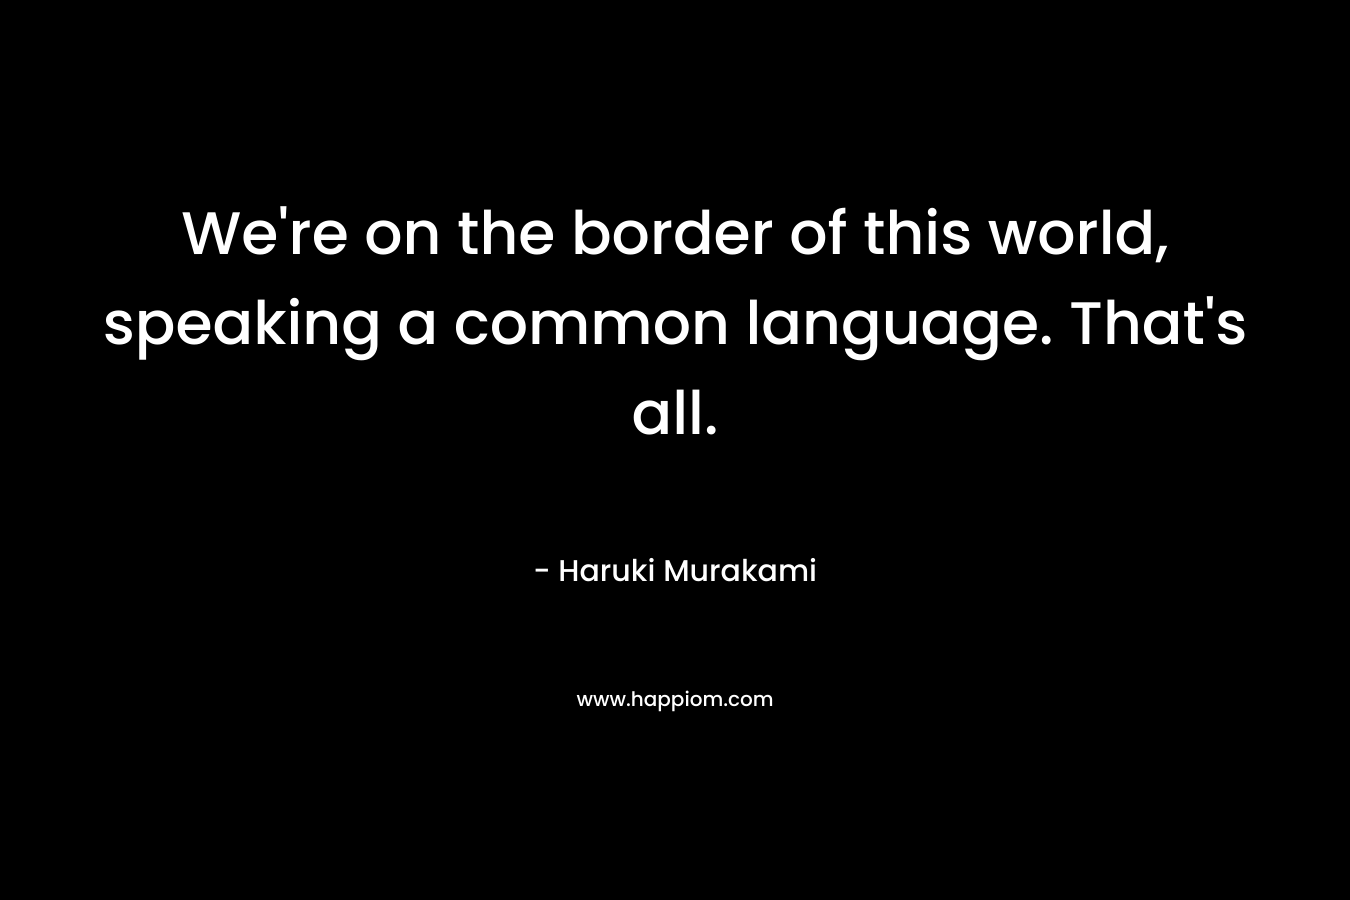 We're on the border of this world, speaking a common language. That's all.